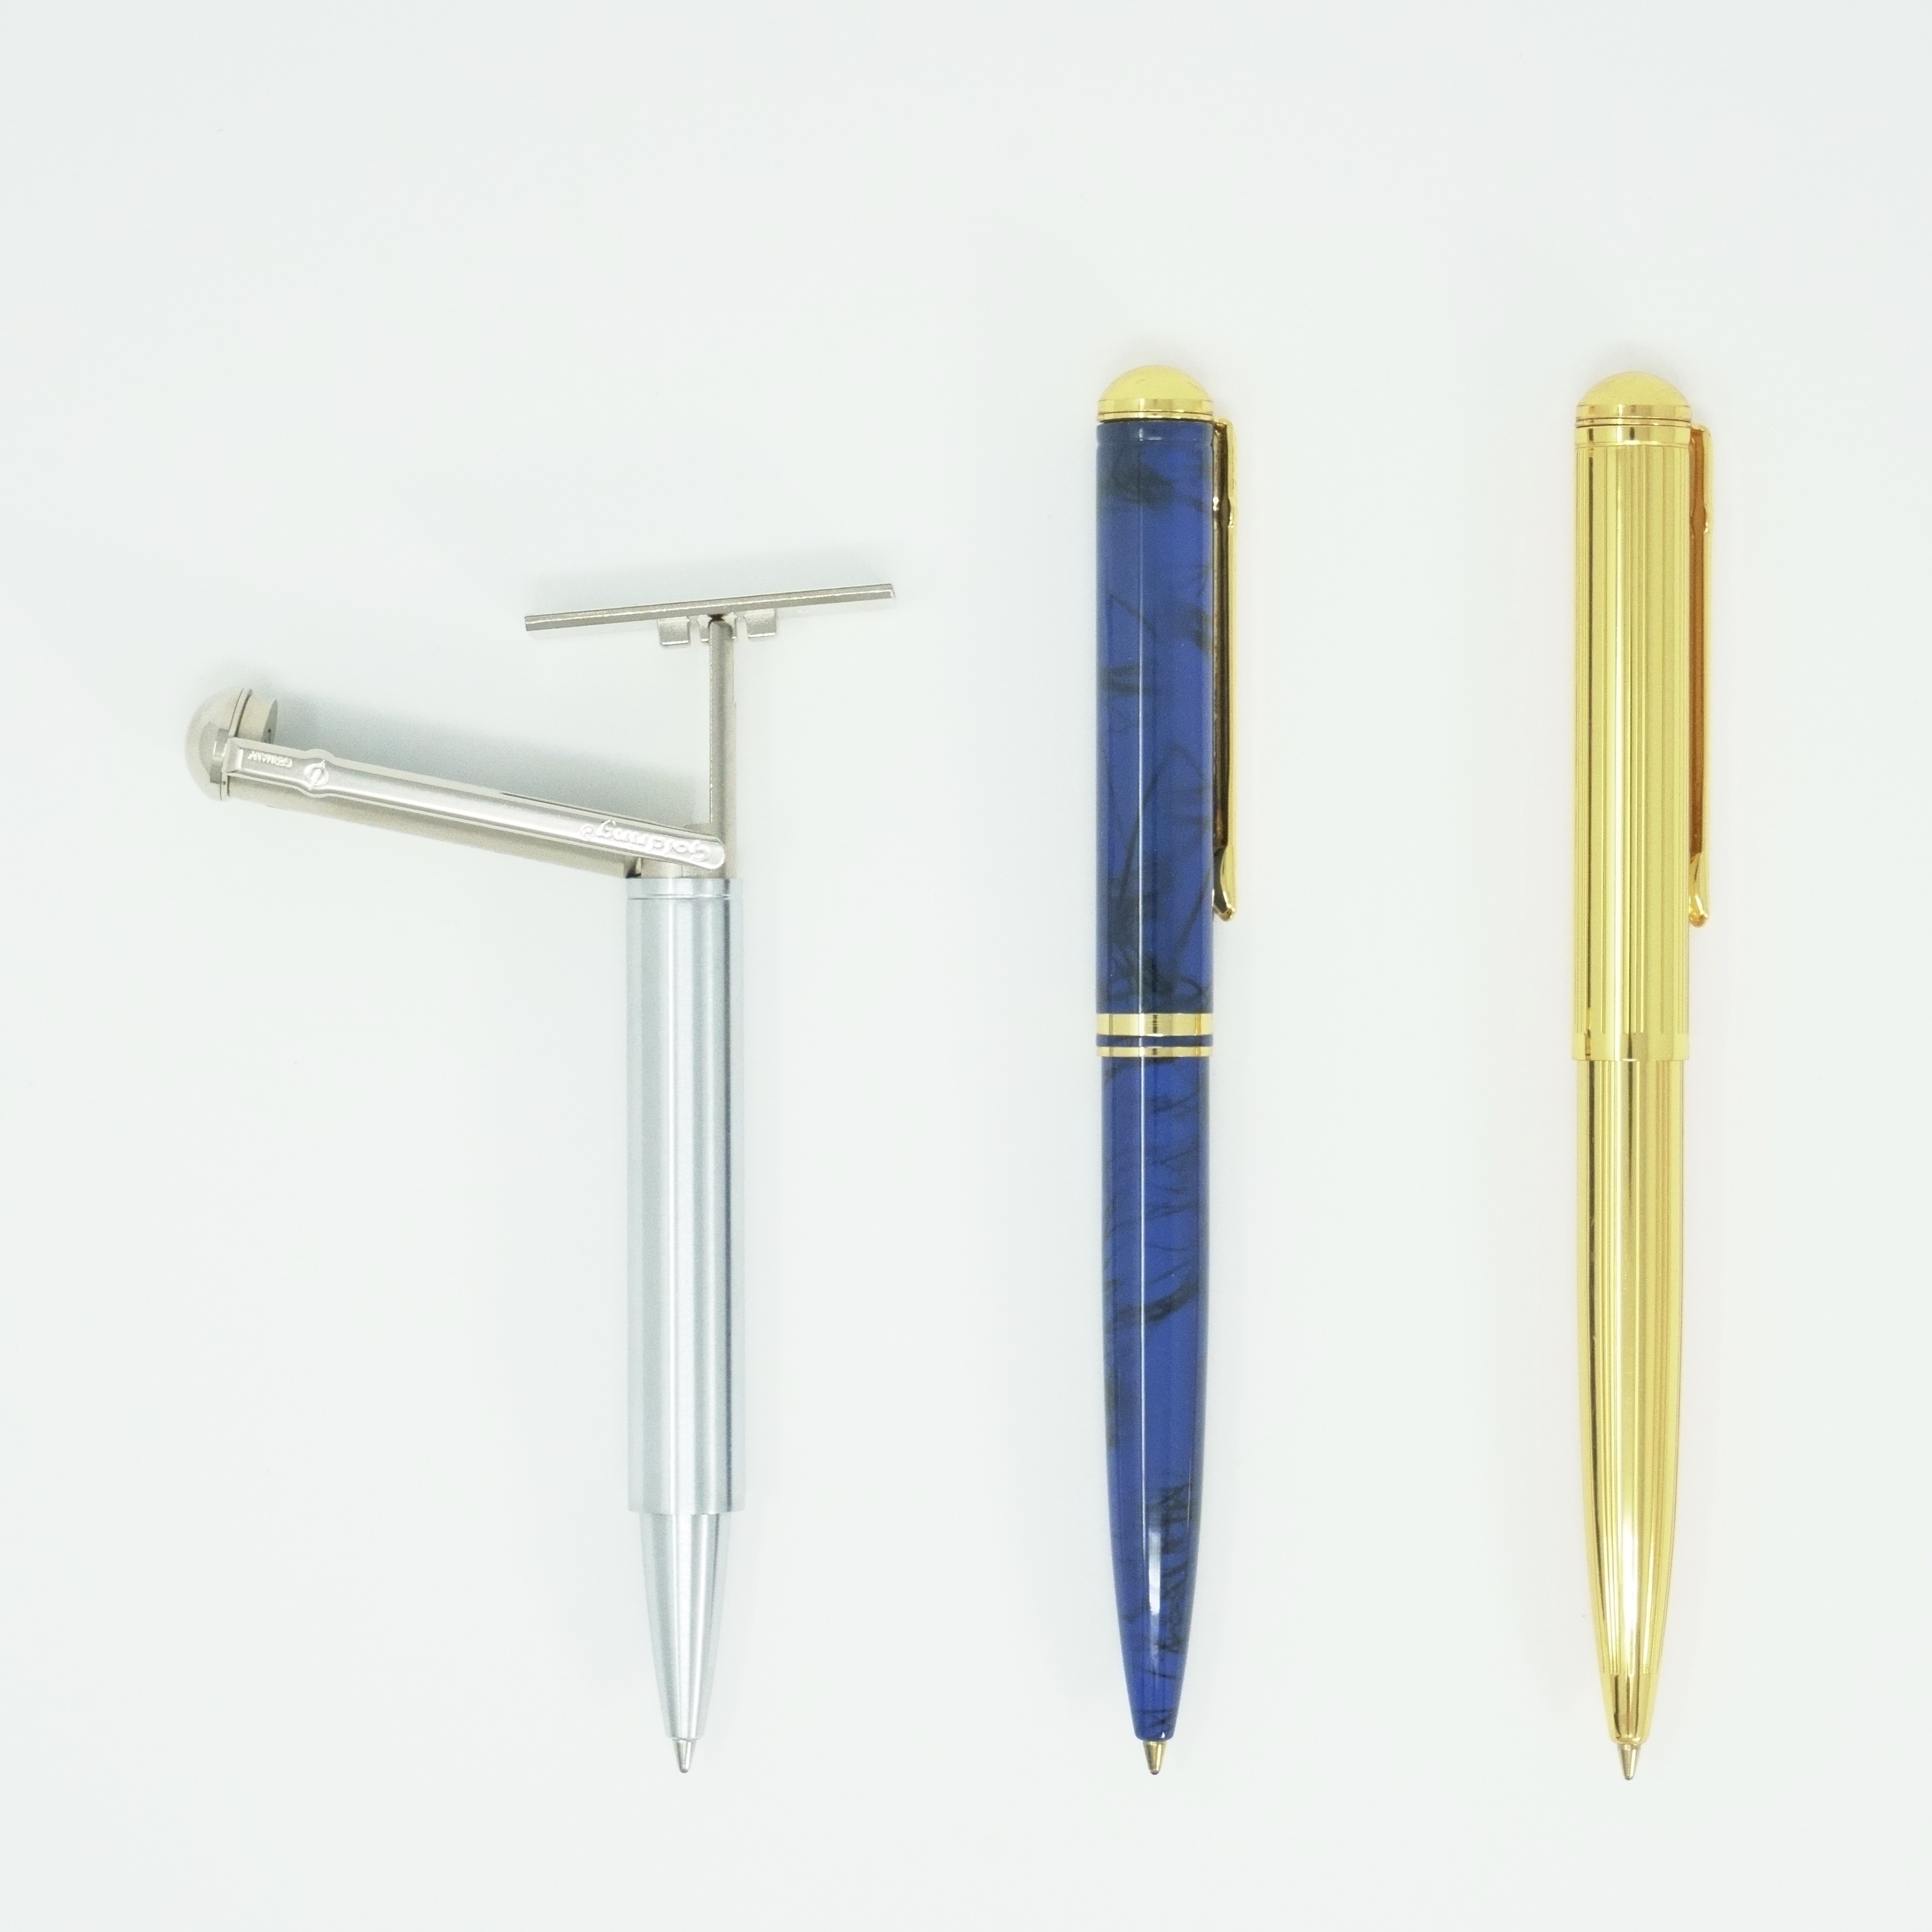 STAMP PENS AND ENGRAVABLE PENS